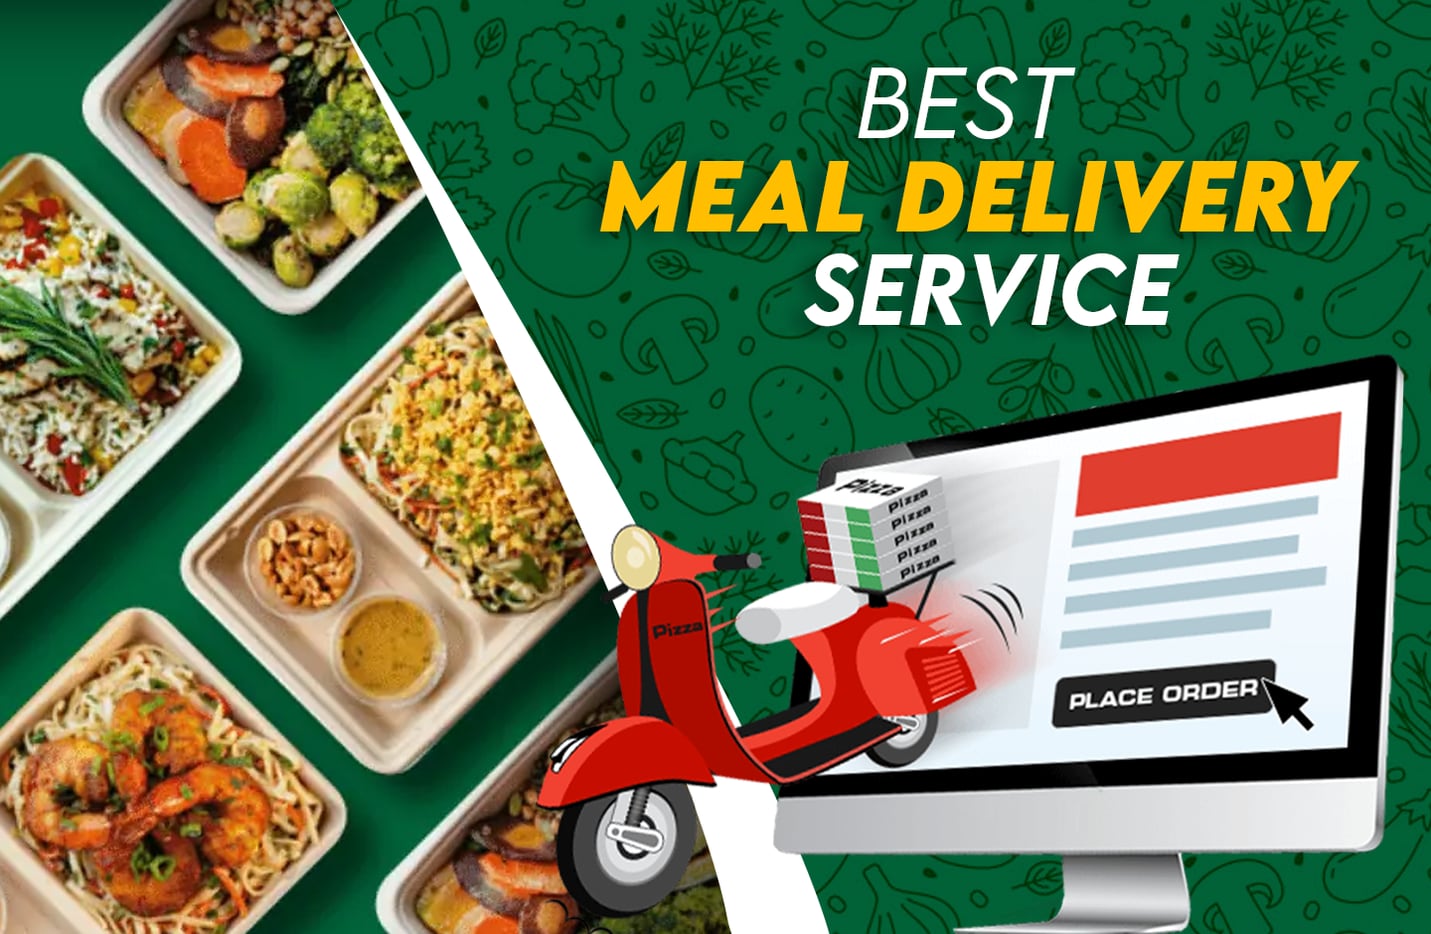 12 Best Meal Delivery Services: Which One Should You Choose?